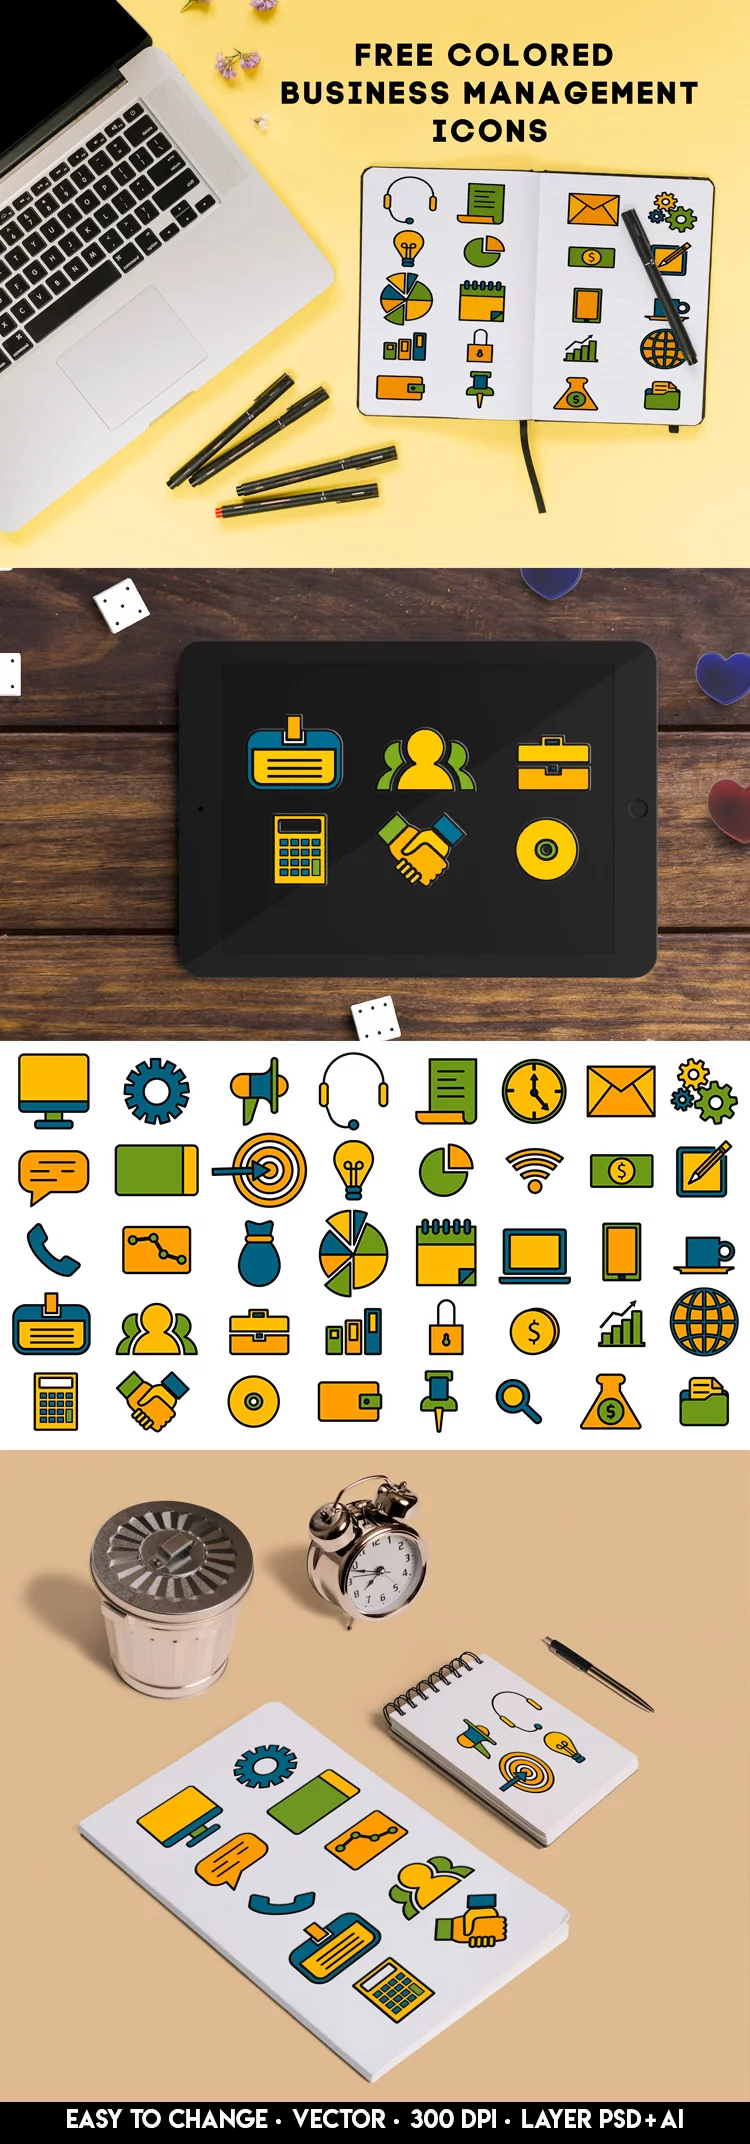 Free Colored Business Management Icons